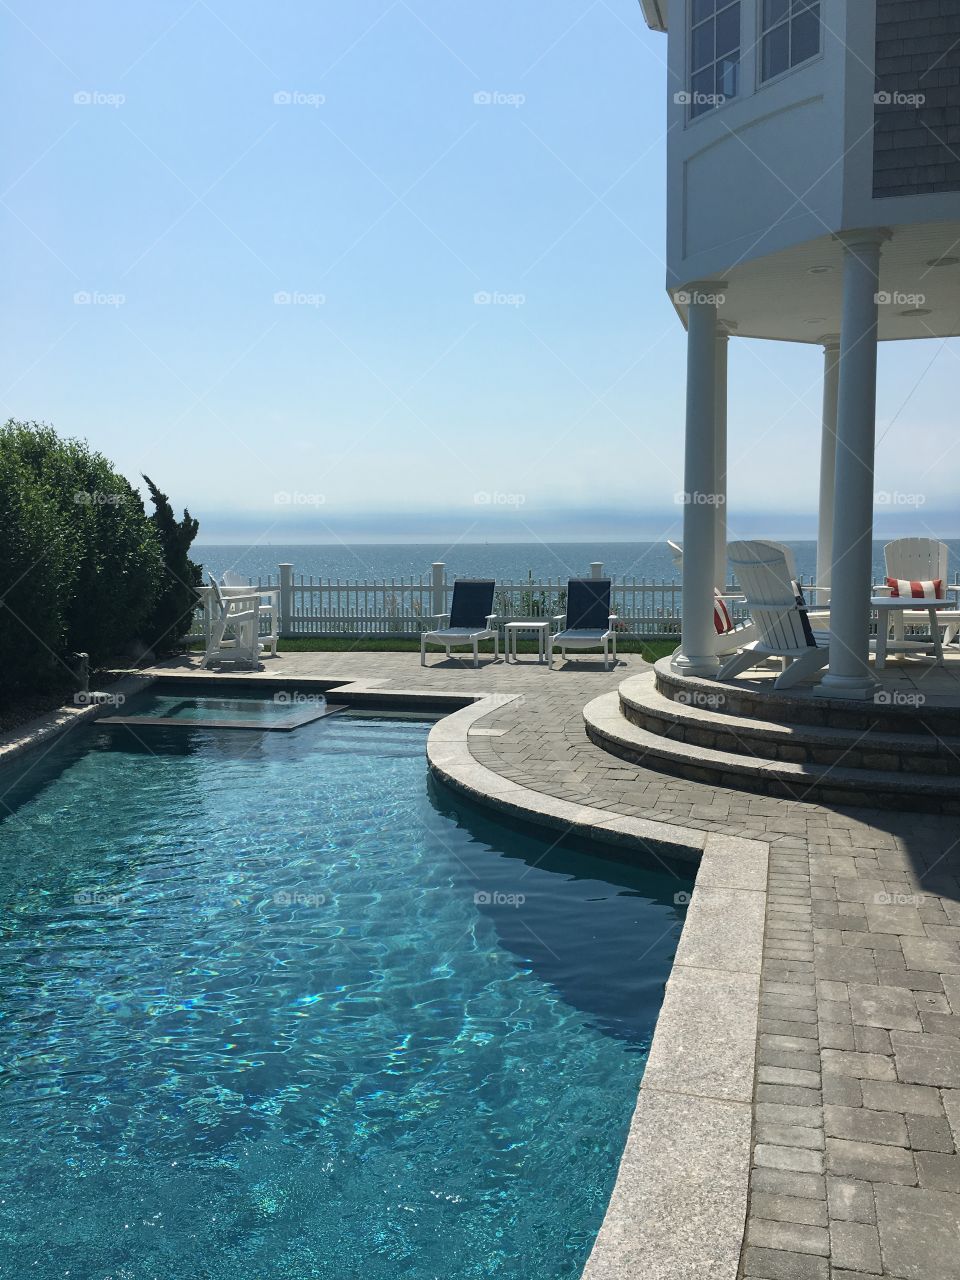 This is a beautiful home that is part of my family on cape cod Massachusetts that’s able to capture the pool and ocean in one